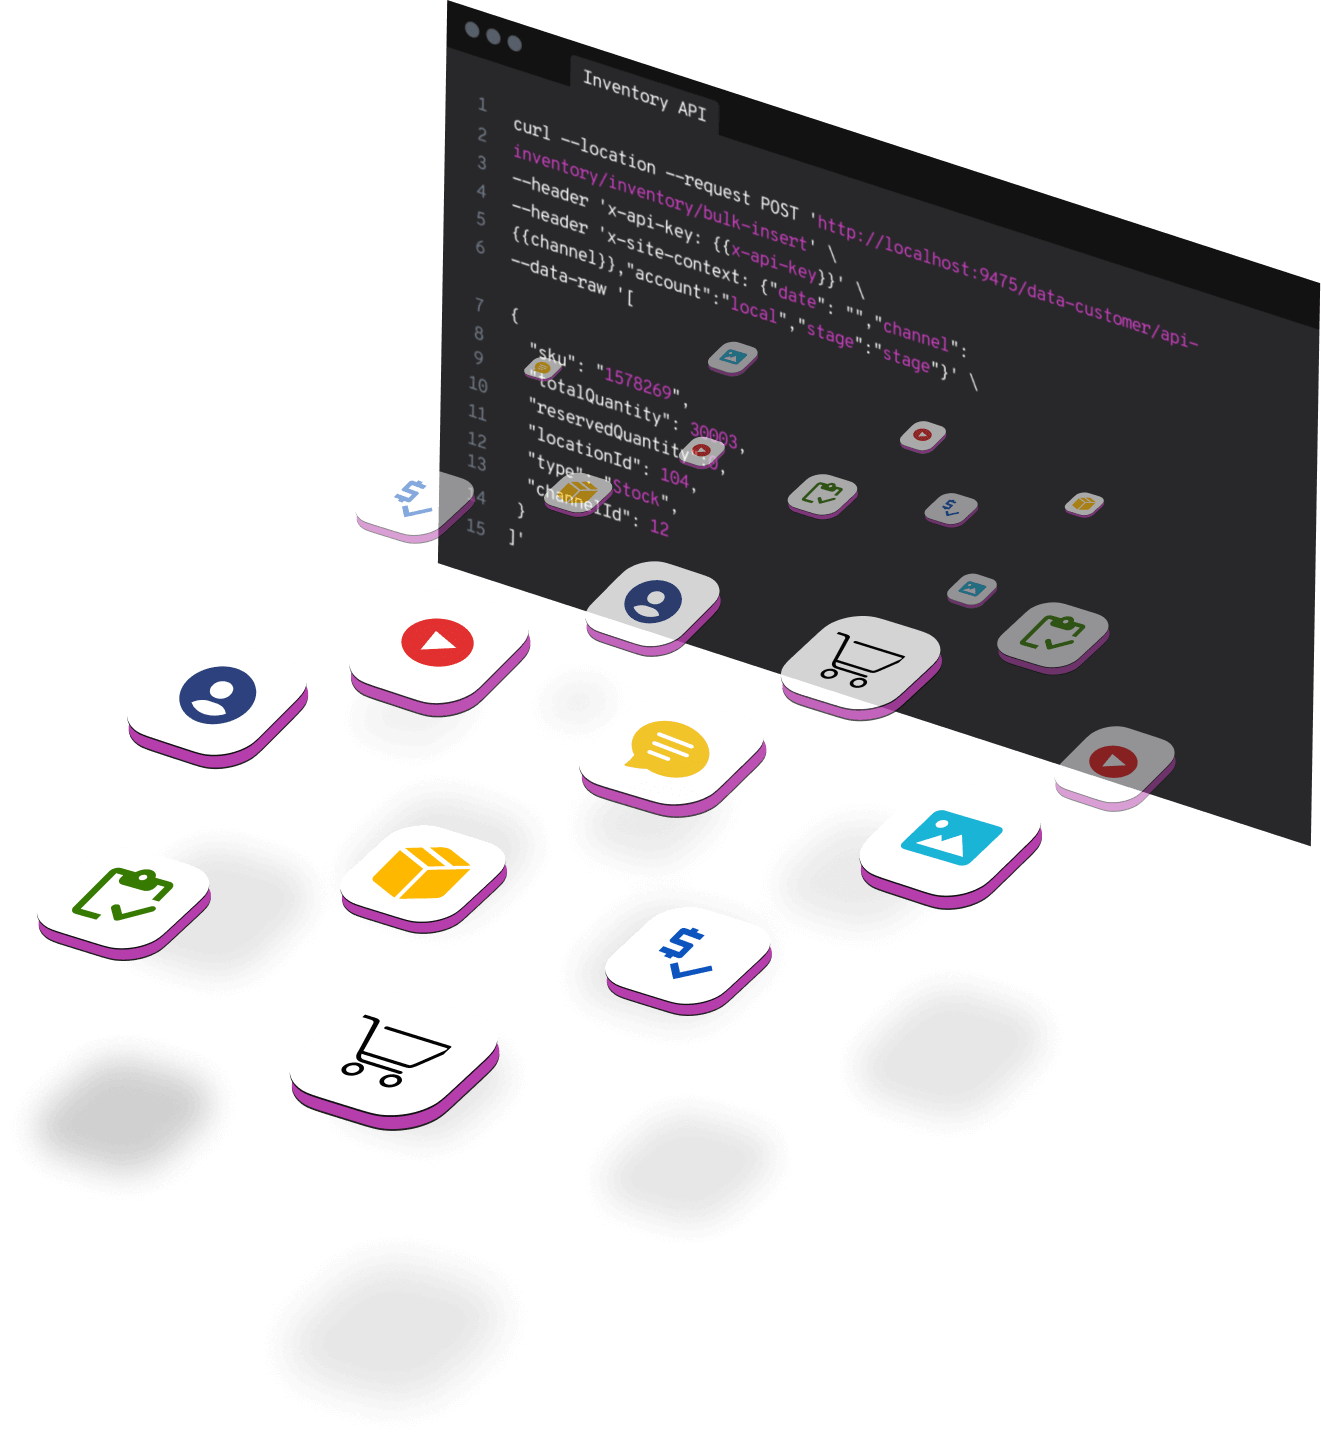 This is an image displaying the full suite of APIs available with fabric.